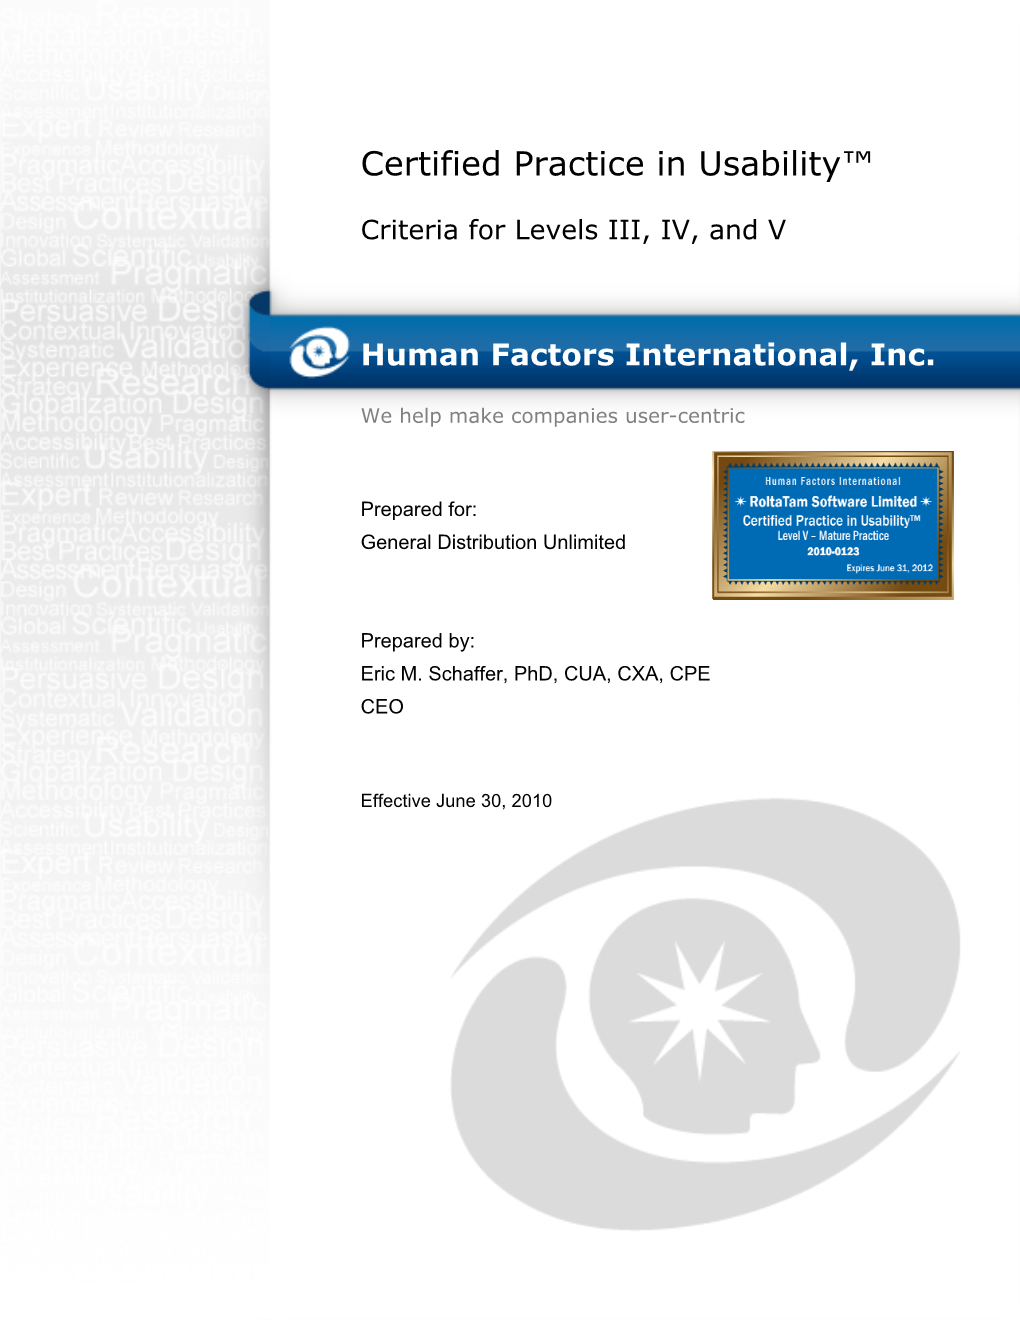 Certified Practice in Usability™ / Criteria for Levels III, IV, and V